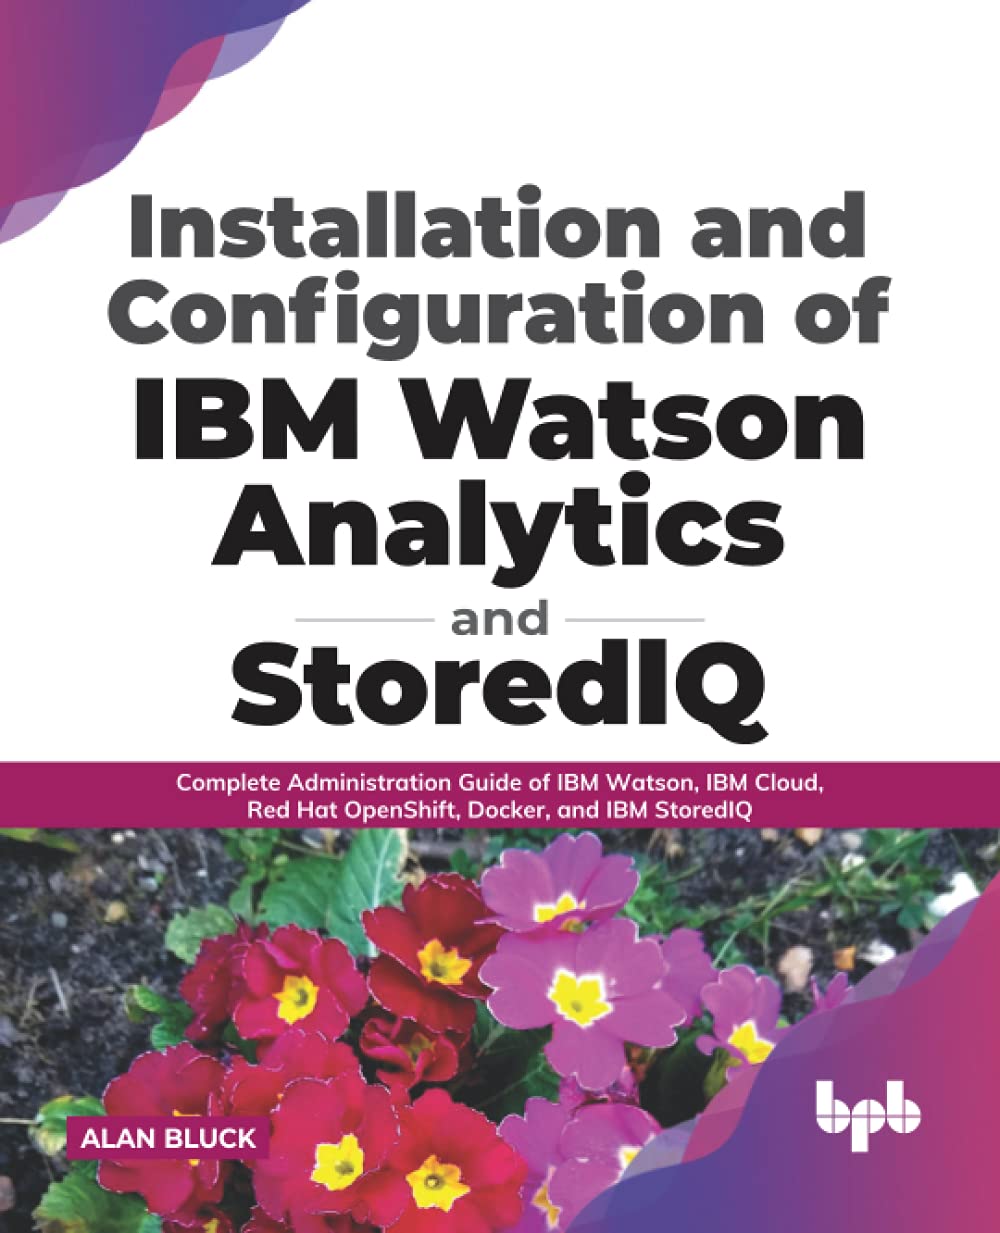 Installation and Configuration of IBM Watson Analytics and StoredIQ: Complete Administration Guide of IBM Watson, IBM Cloud, Red Hat OpenShift, Docker, and IBM StoredIQ by  Alan Bluck